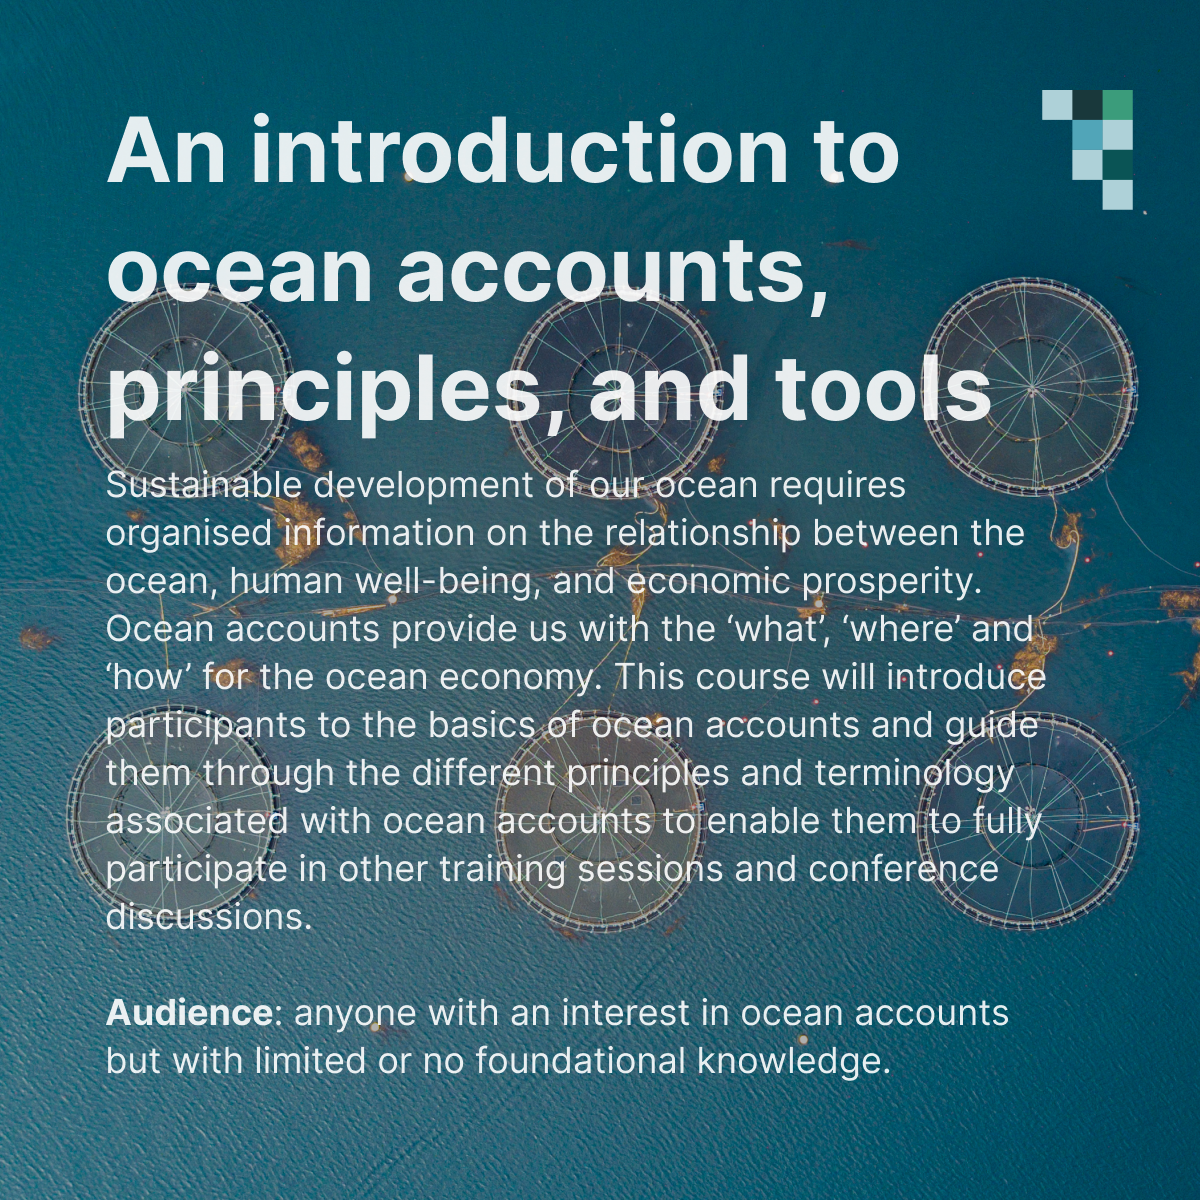 The Global Dialogue on Sustainable Ocean Development